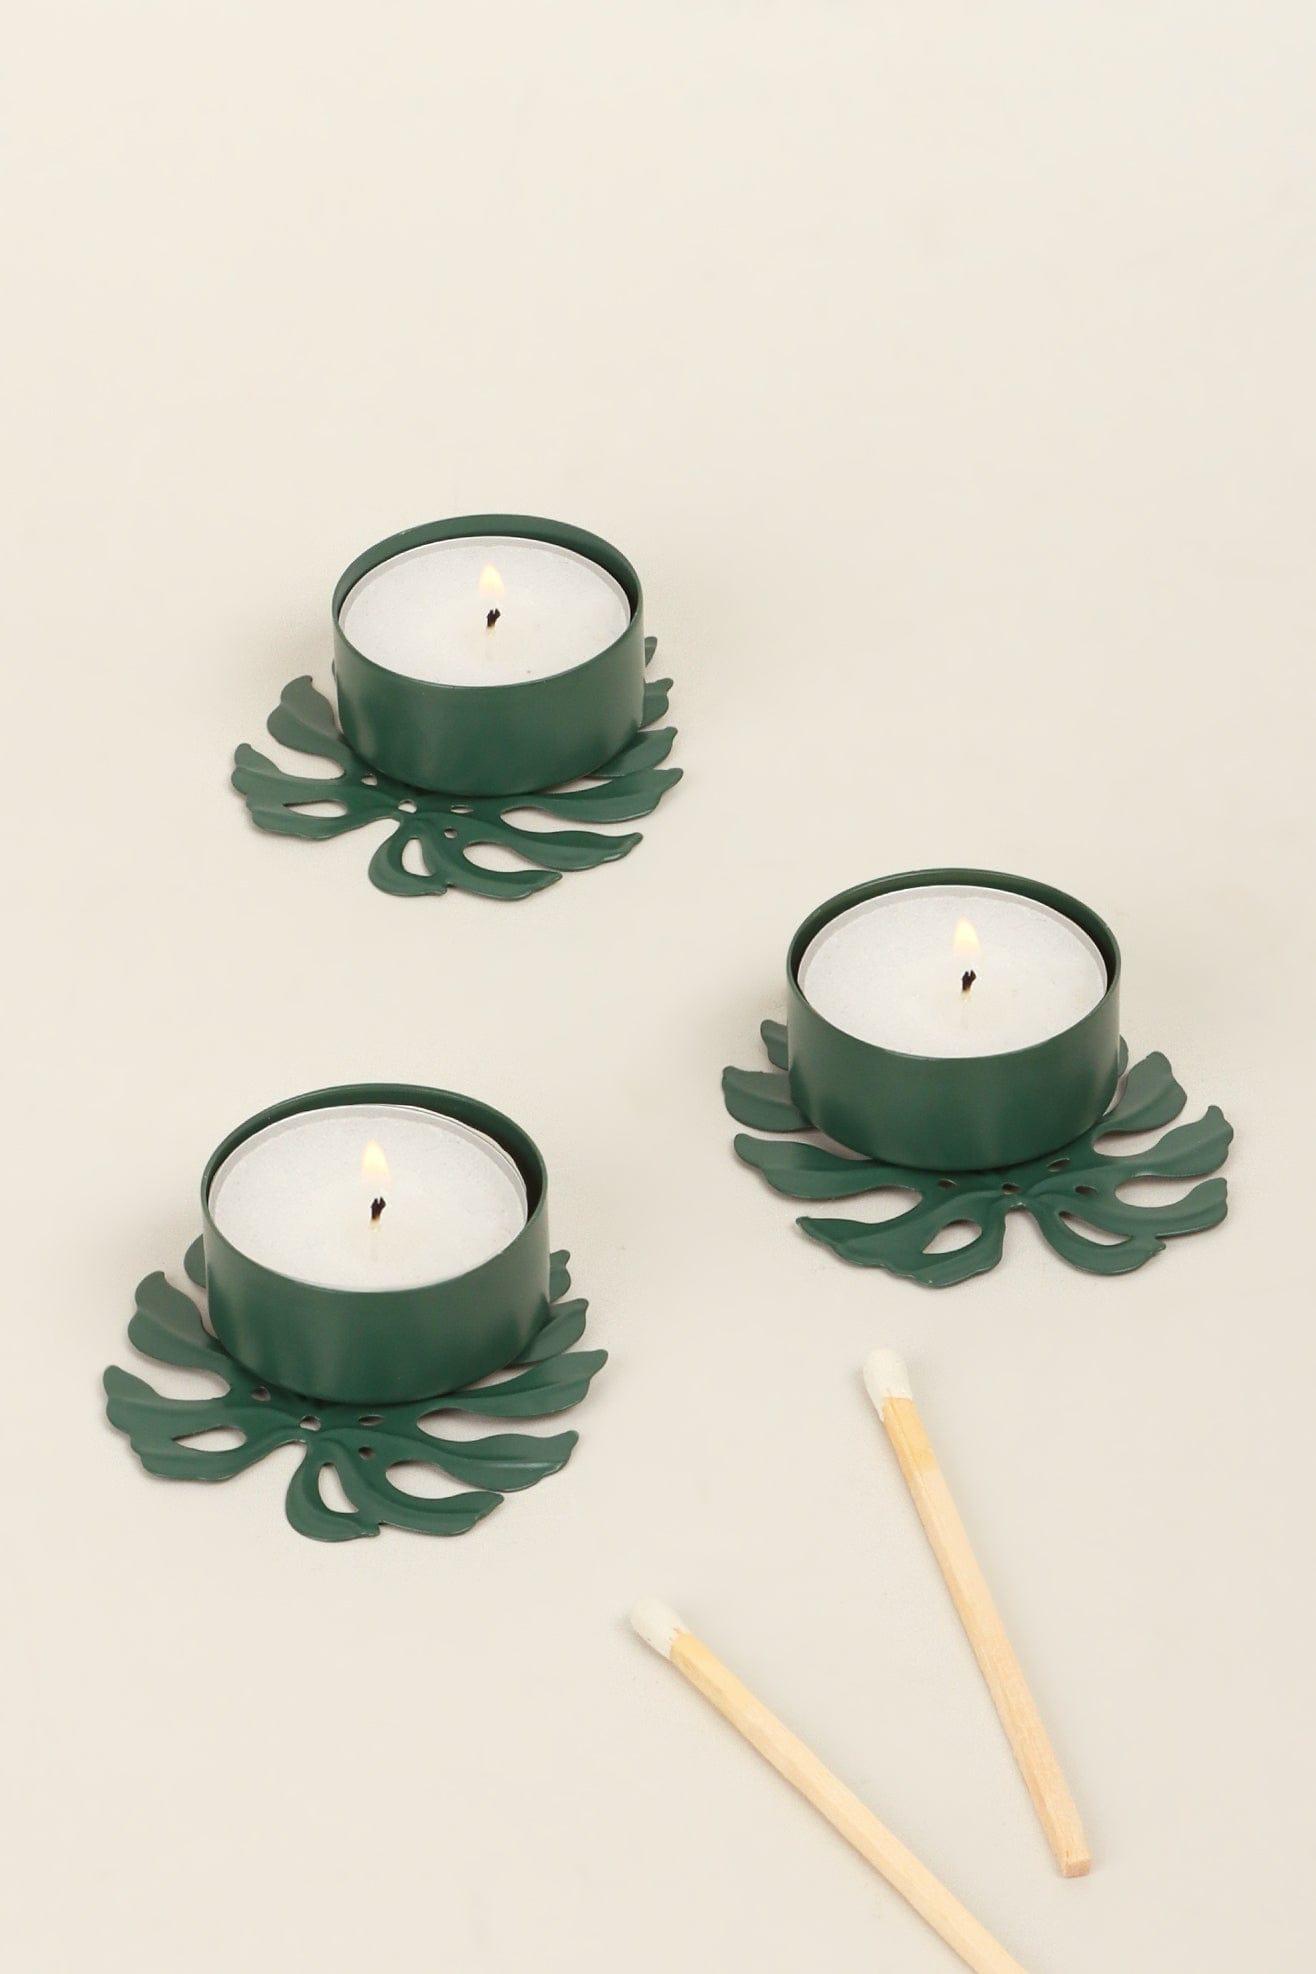 G Decor Candles & Candle Holders Green Set of 3 Green Palm Leaf Tea Light Holders